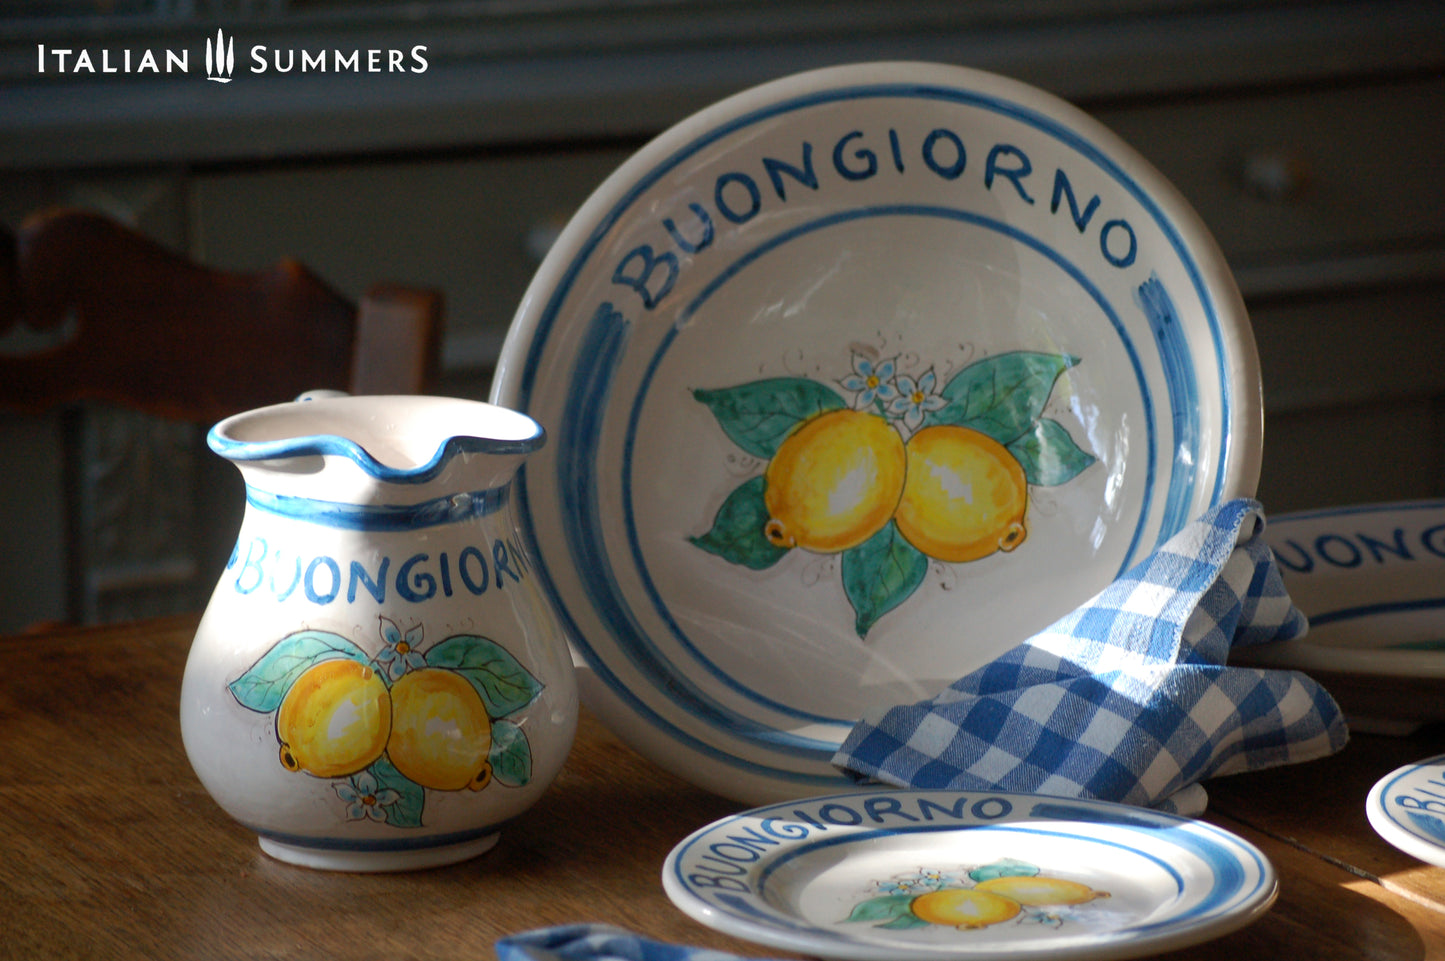 Italy ceramic fruit stand with Amalfi Coast lemons and the greeting Buongiorno . Hand painted in Sicily. Designed and sold by Italian Summers